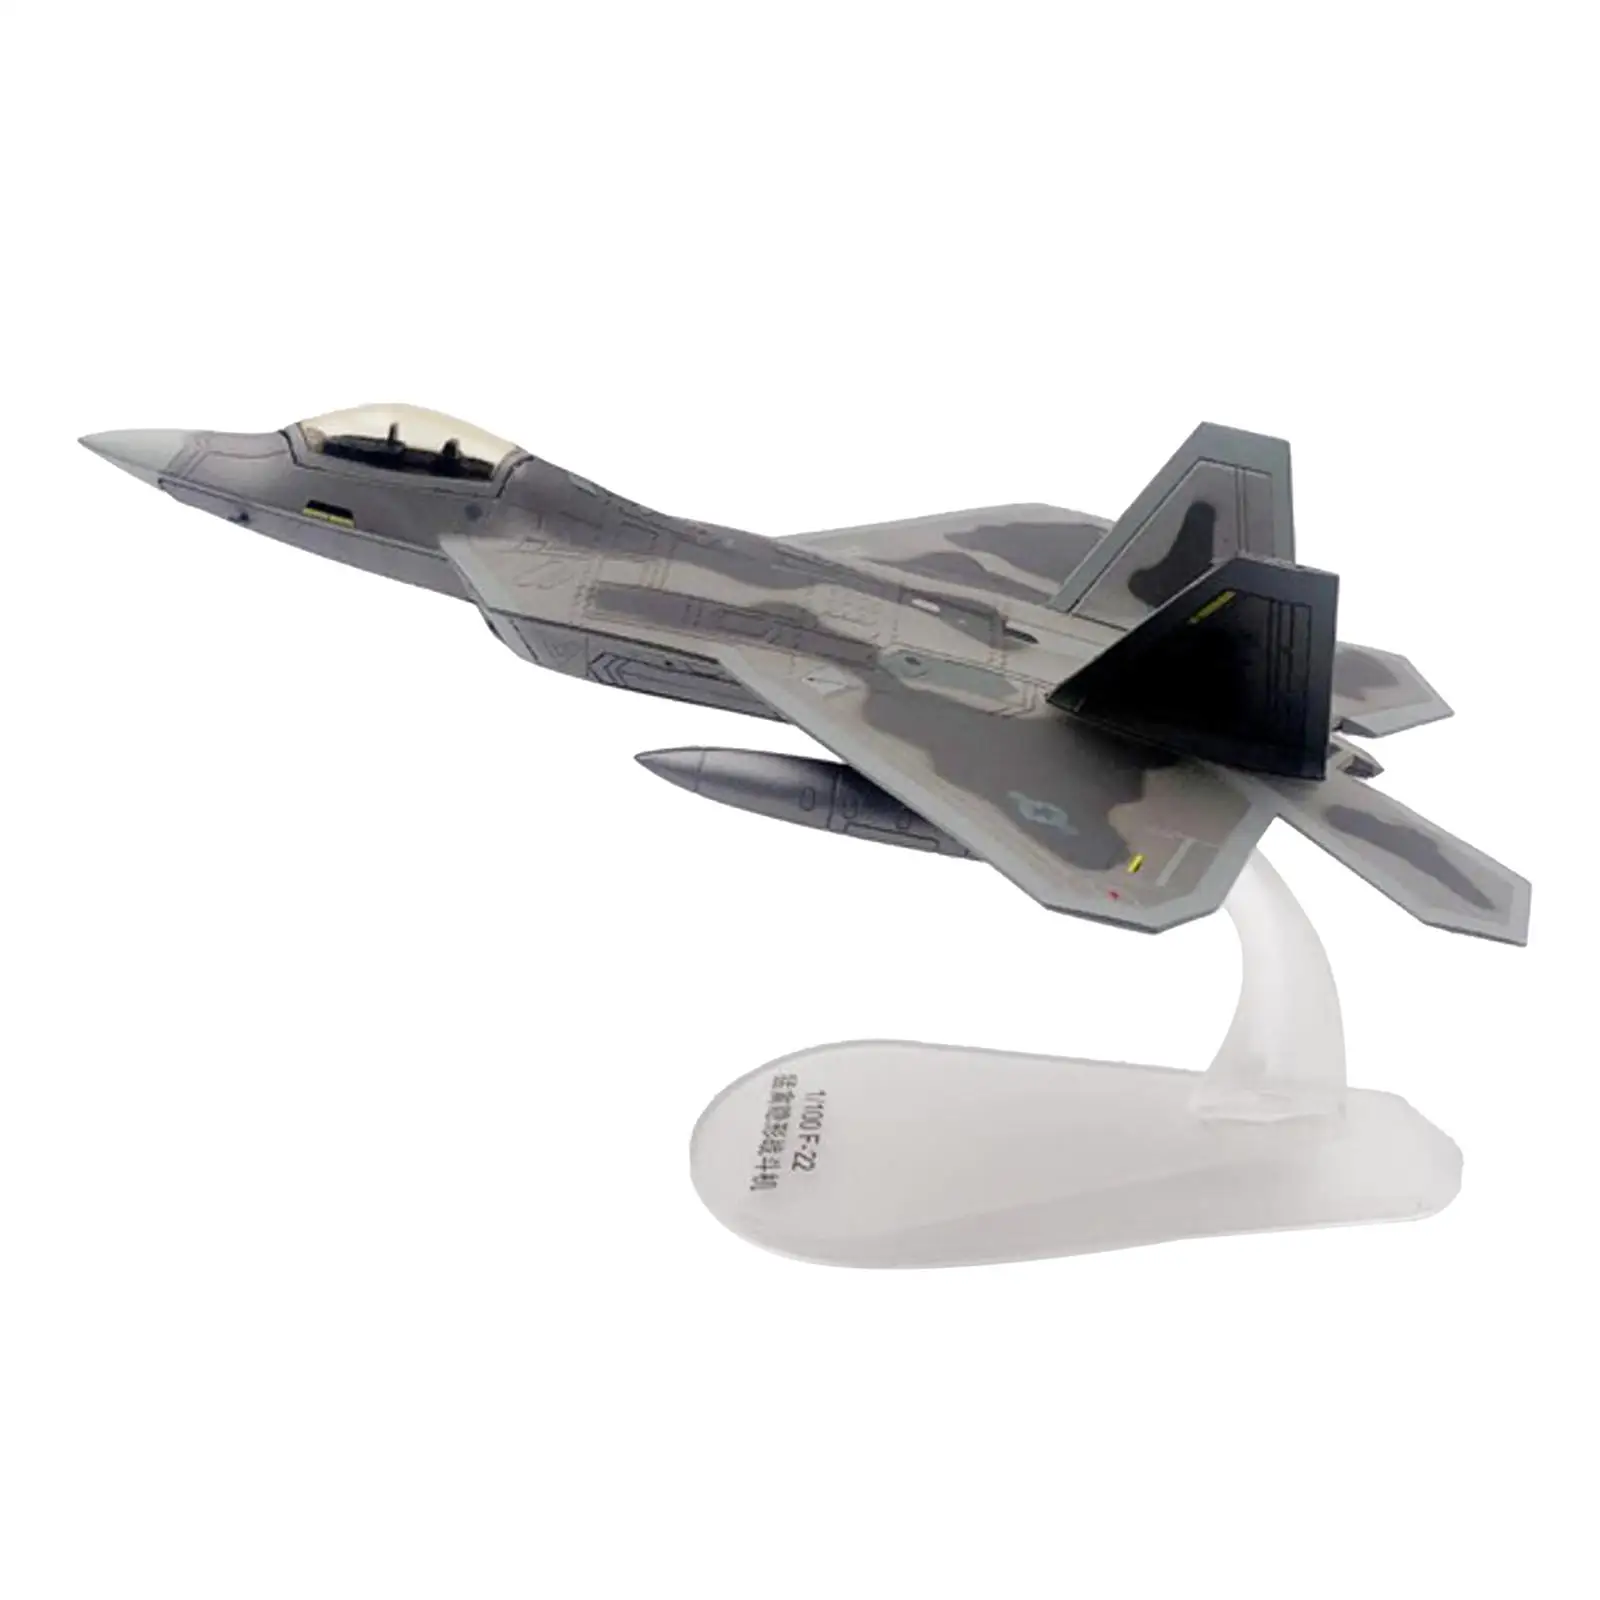 1/100 Diecast American Aircraft Plane Toys Model w/ Stand